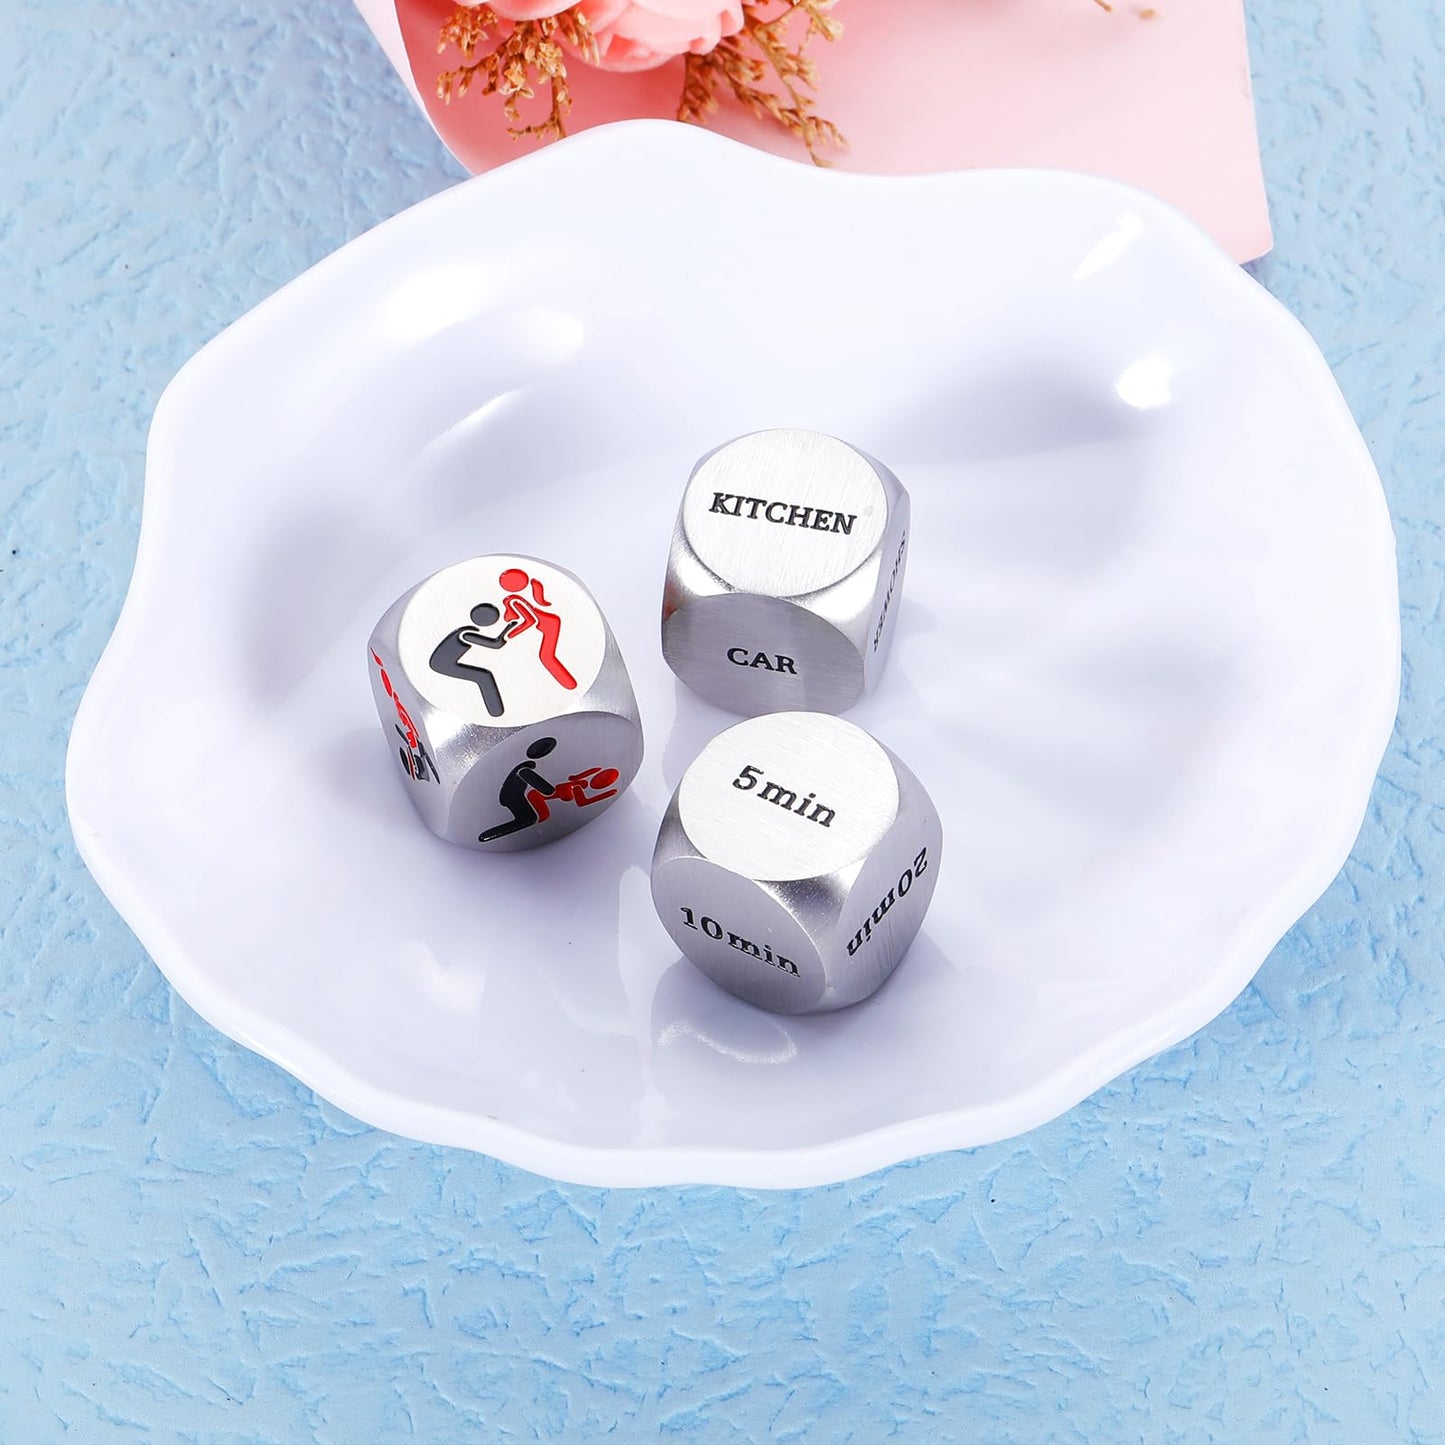 Anniversary Valentines Day Gifts for Him Her Date Night Ideas for Couples Food Decision Dice Christmas Birthday Gifts for Boyfriend Husband from Girlfriend Wife Funny Gifts for Men Women Coworker